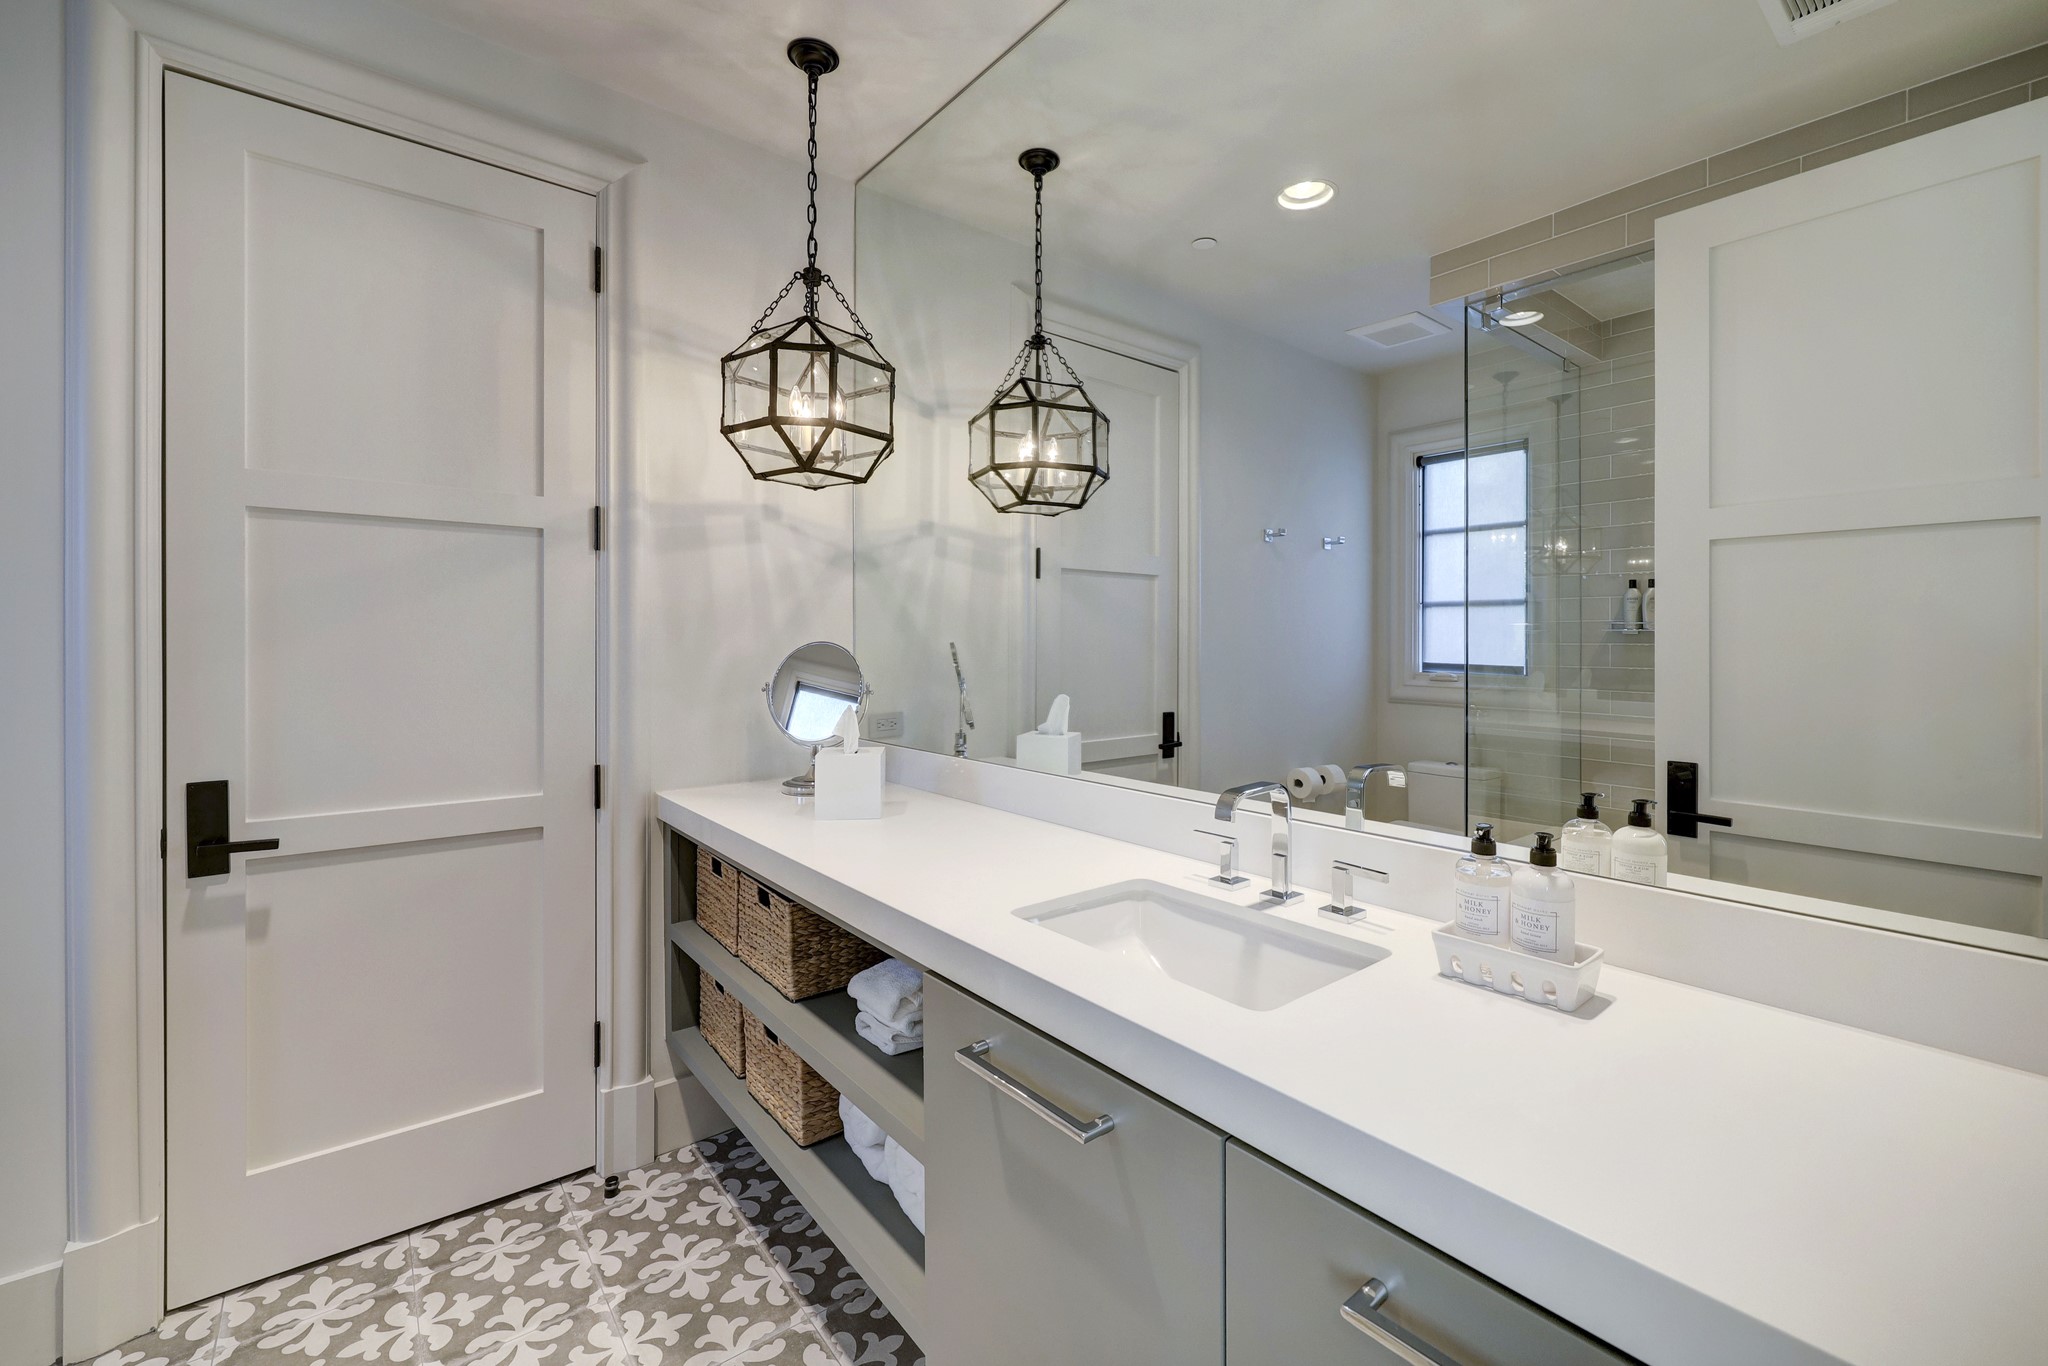 The en-suite bathroom has a floating vanity with quartz countertops, a walk-in shower with glass entry, and a steel and glass hanging pendant accent light.